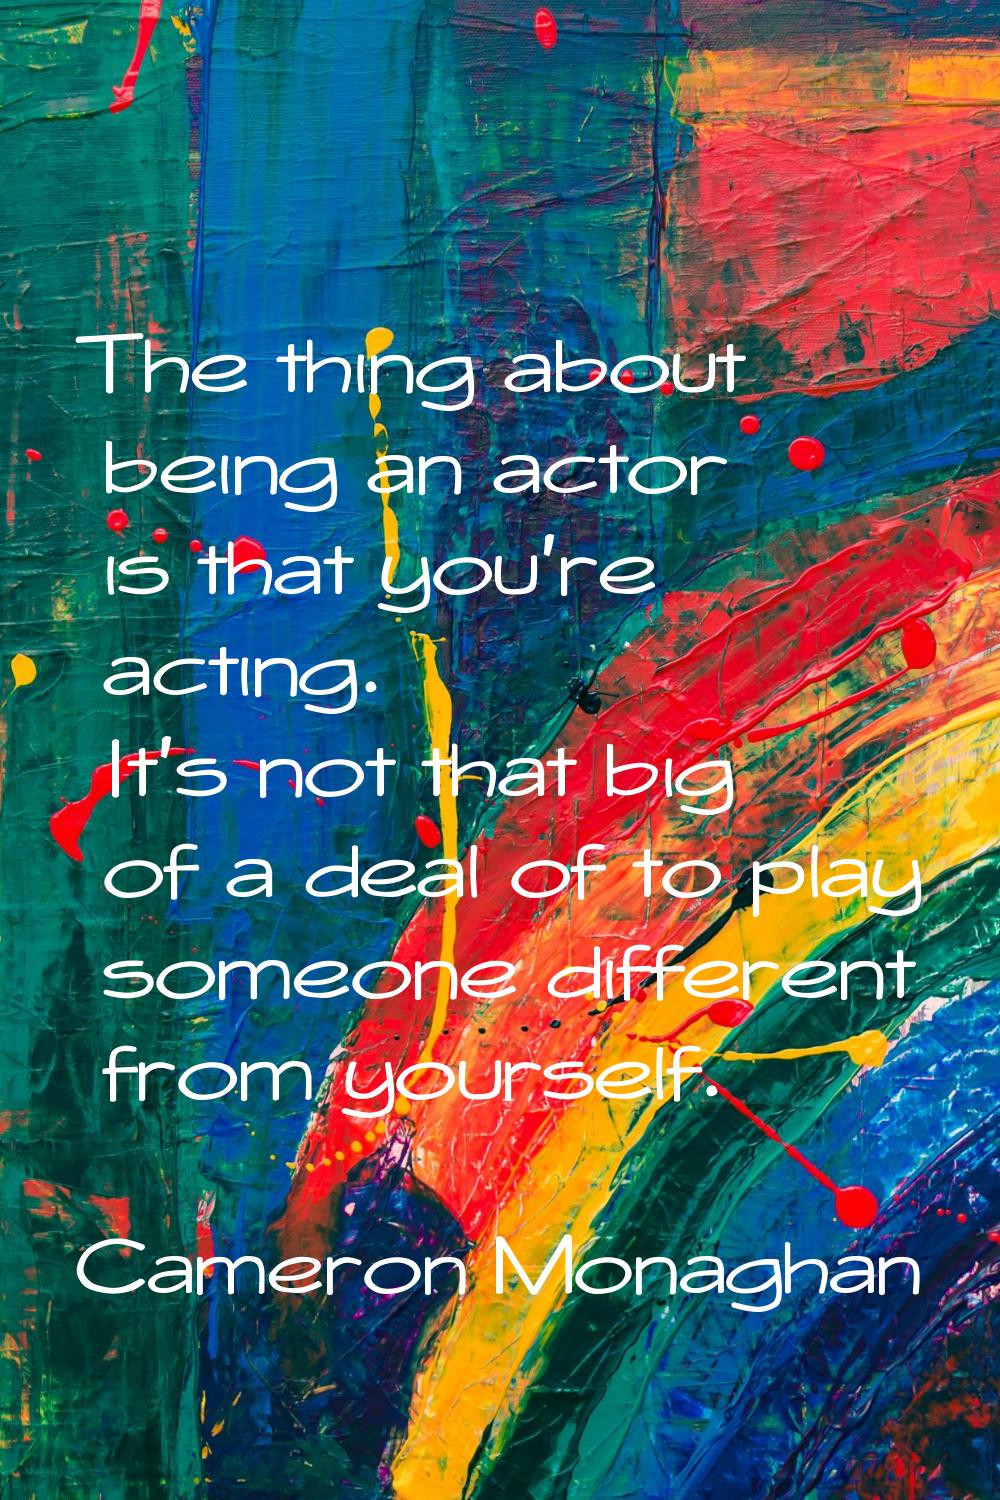 The thing about being an actor is that you're acting. It's not that big of a deal of to play someon